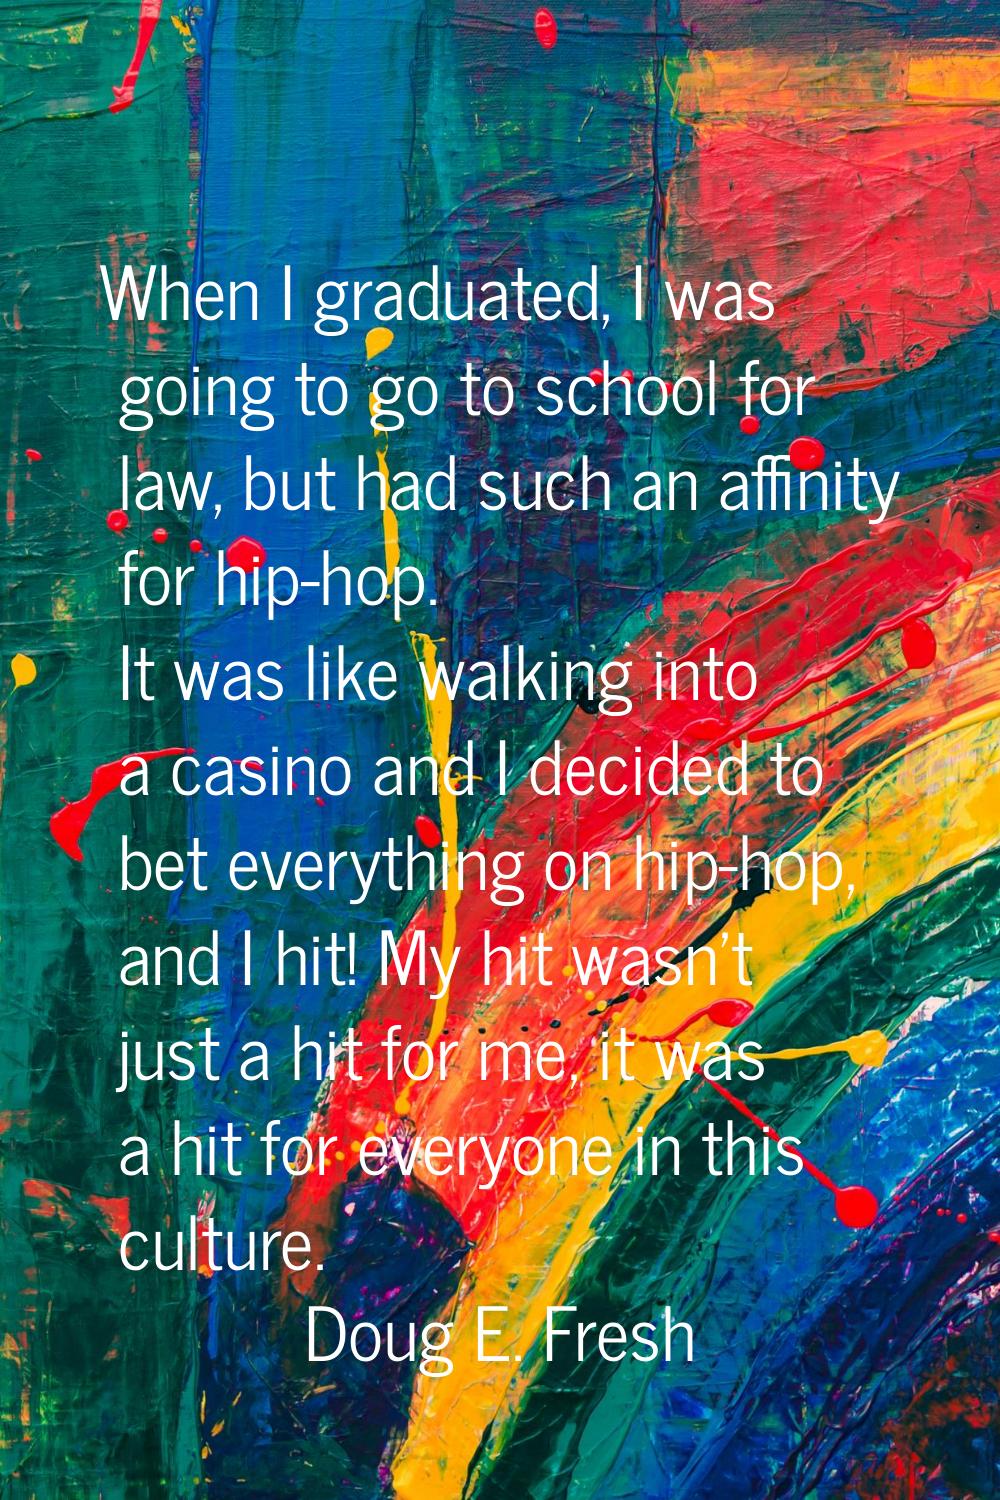 When I graduated, I was going to go to school for law, but had such an affinity for hip-hop. It was